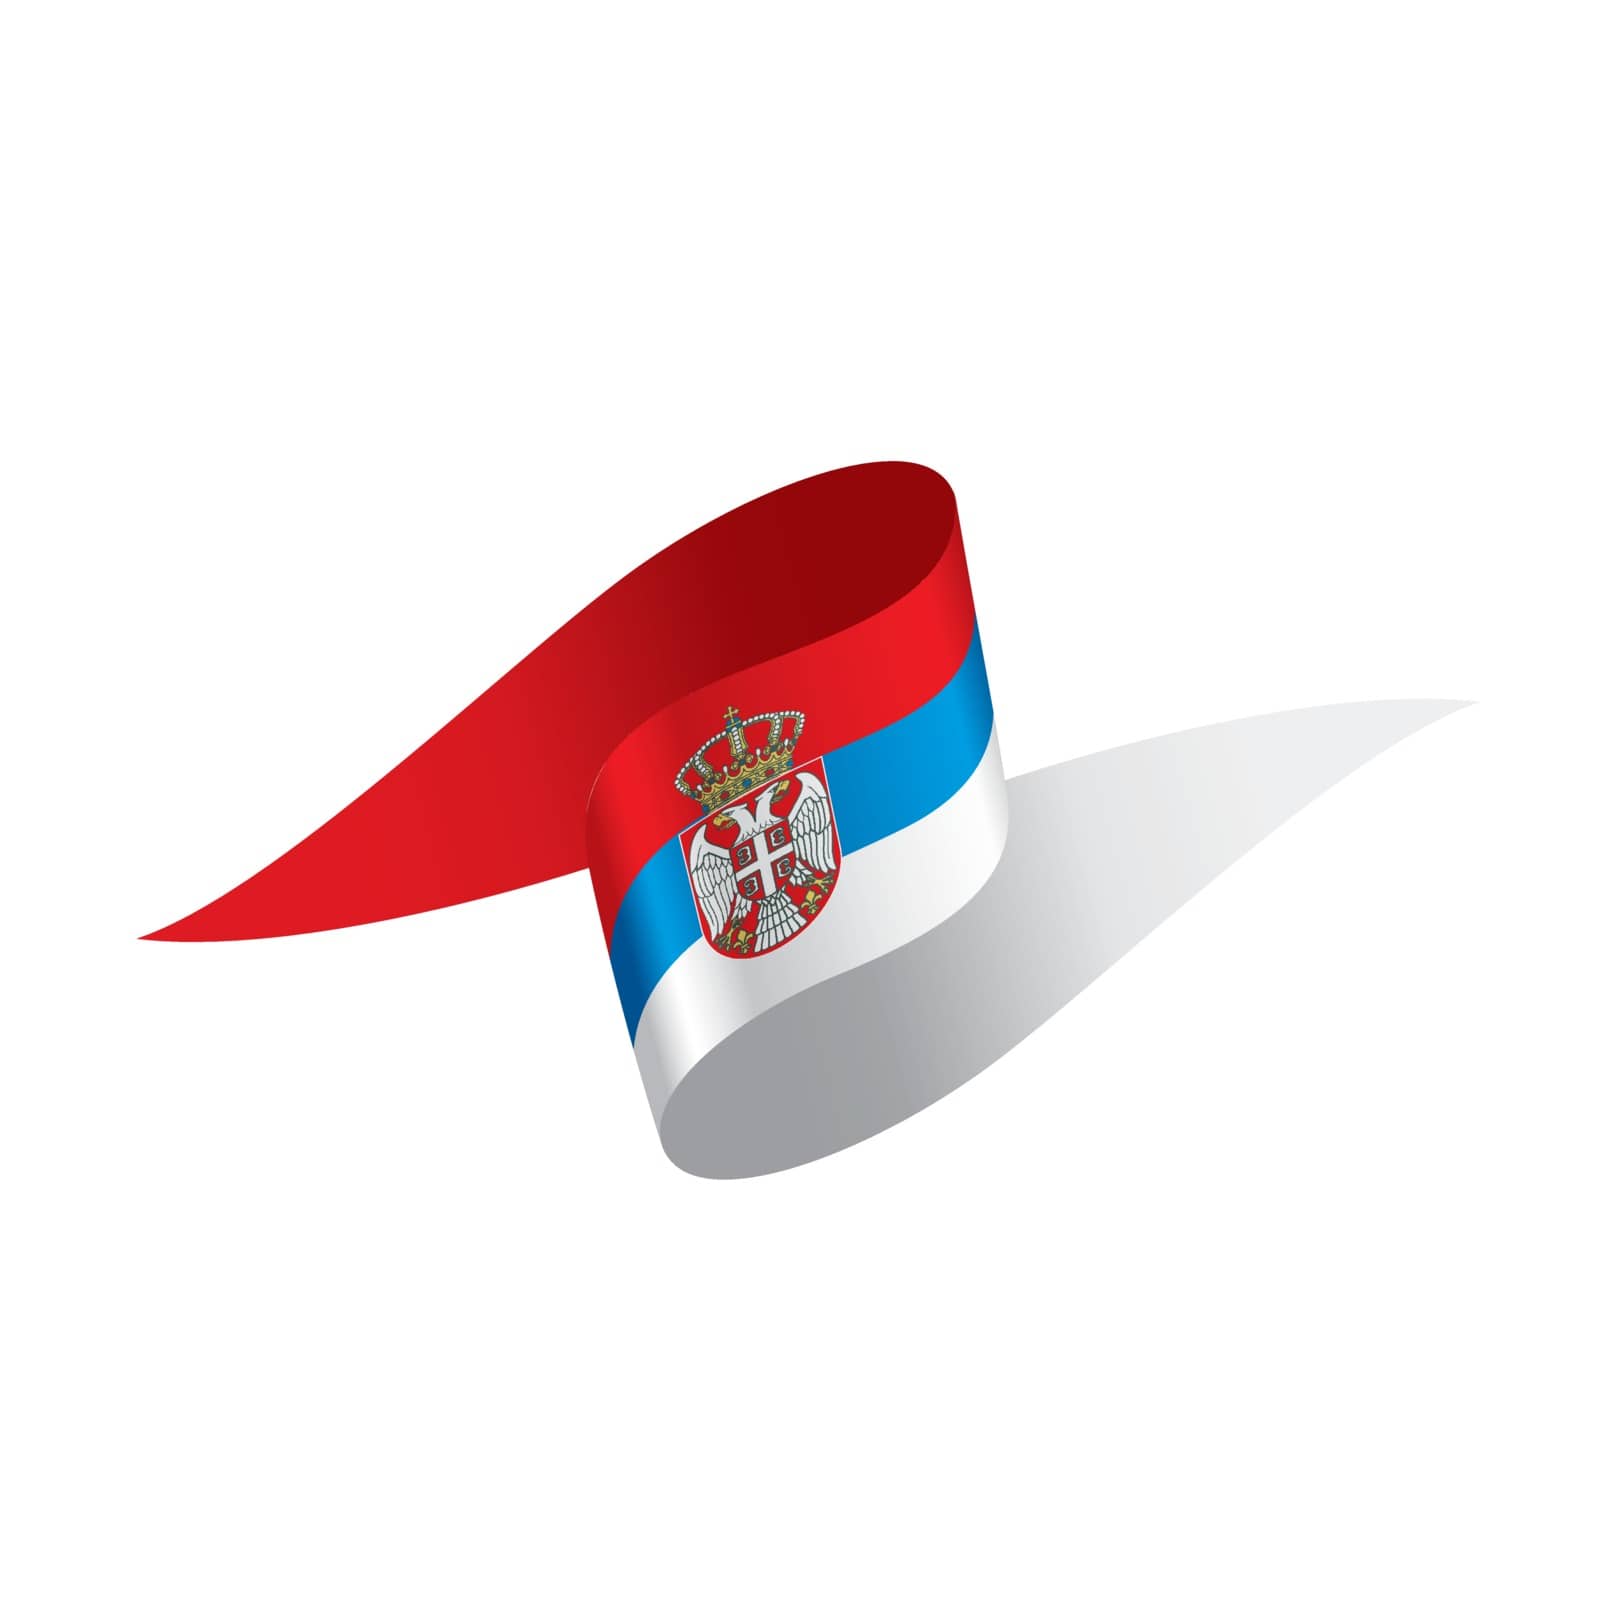 Serbia flag, vector illustration by butenkow